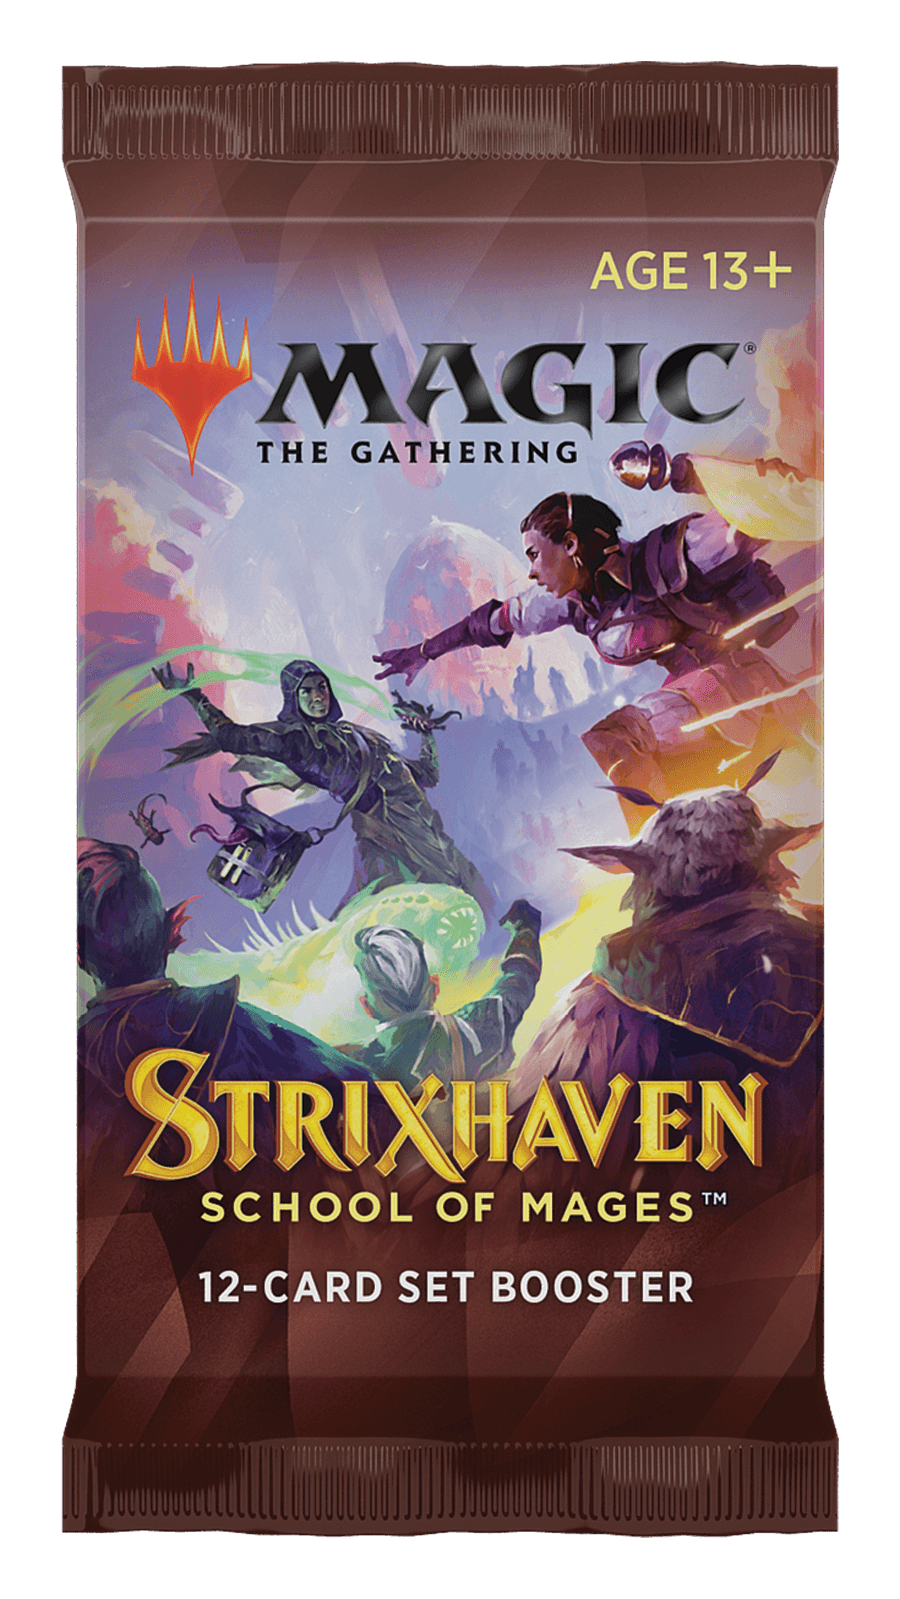 Magic the Gathering: Strixhaven Set Booster CCG Wizards of the Coast 